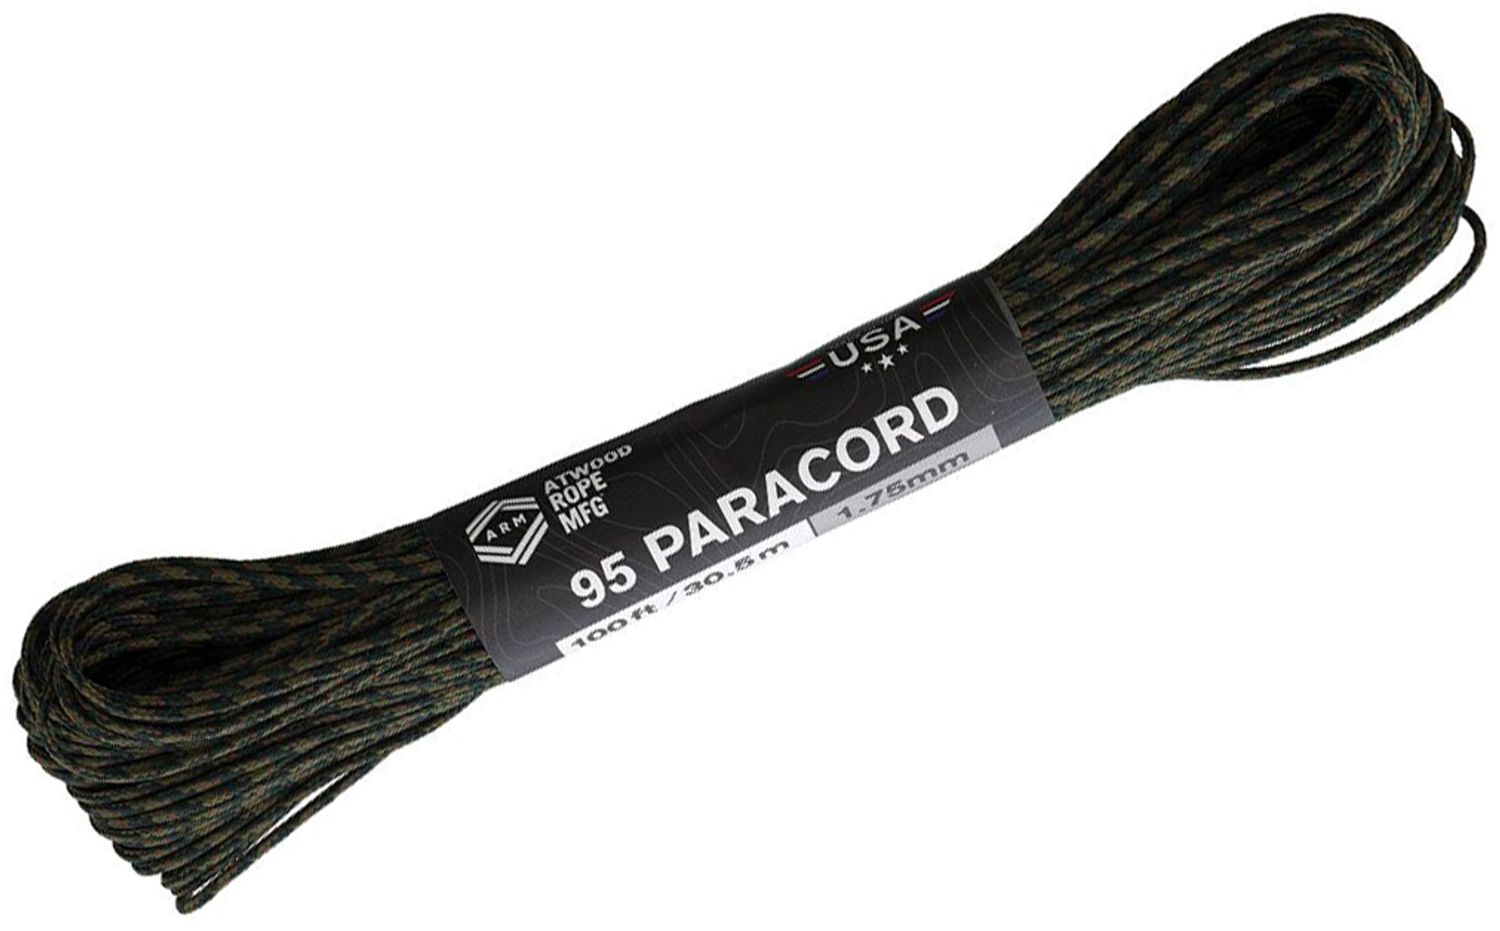 Atwood Rope 95 Paracord, Woodland Camo, 100 Feet - KnifeCenter - RG1323H